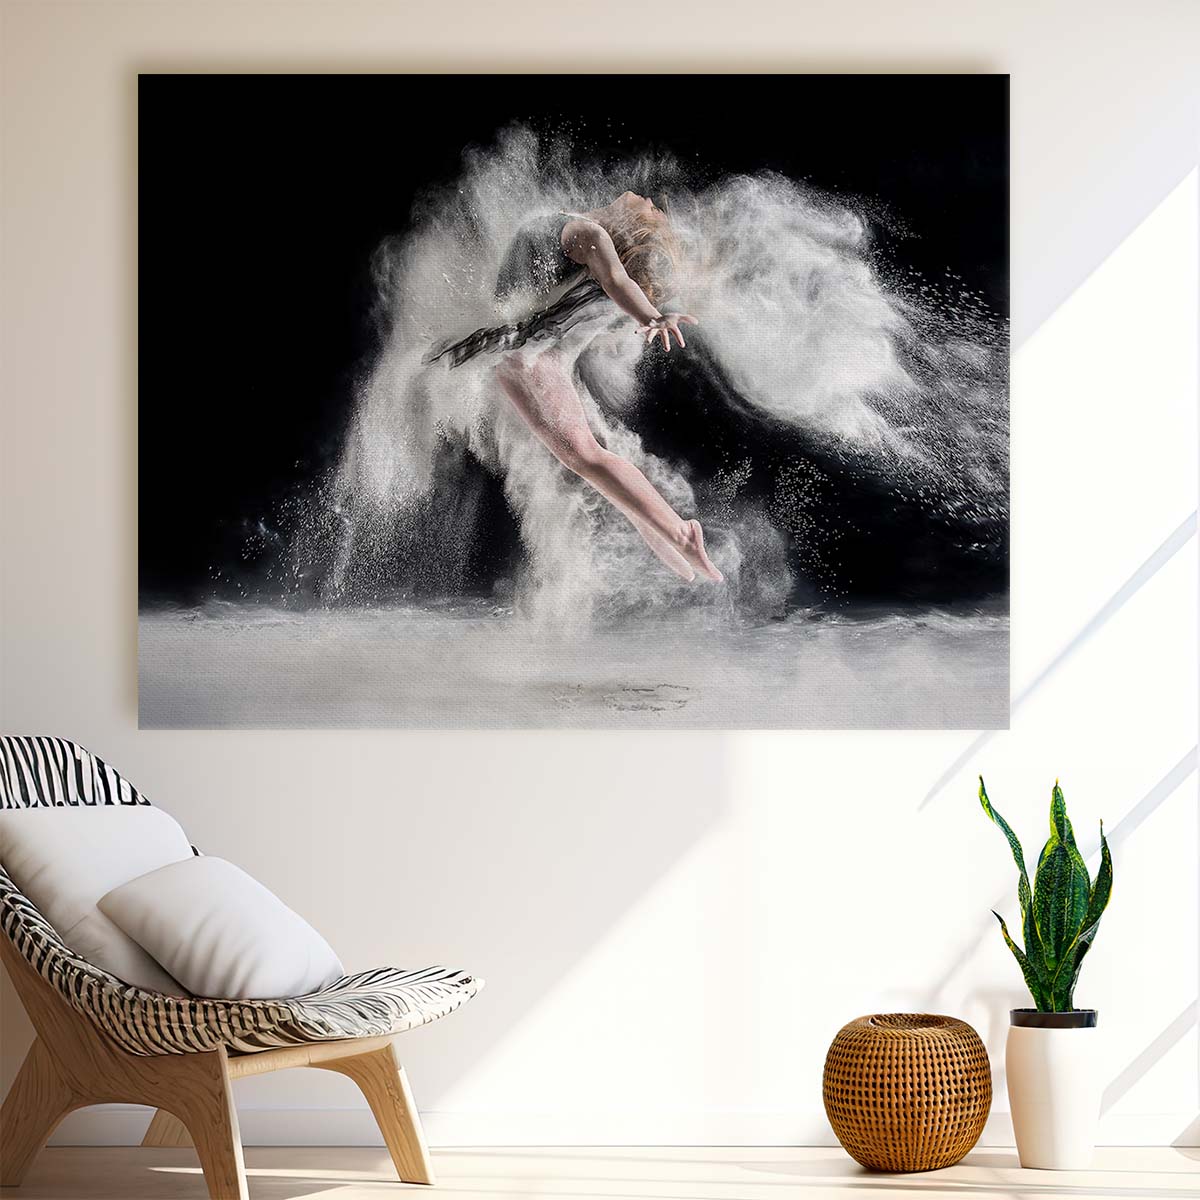 Dramatic Leap Dance Explosion Female Performer Wall Art by Luxuriance Designs. Made in USA.